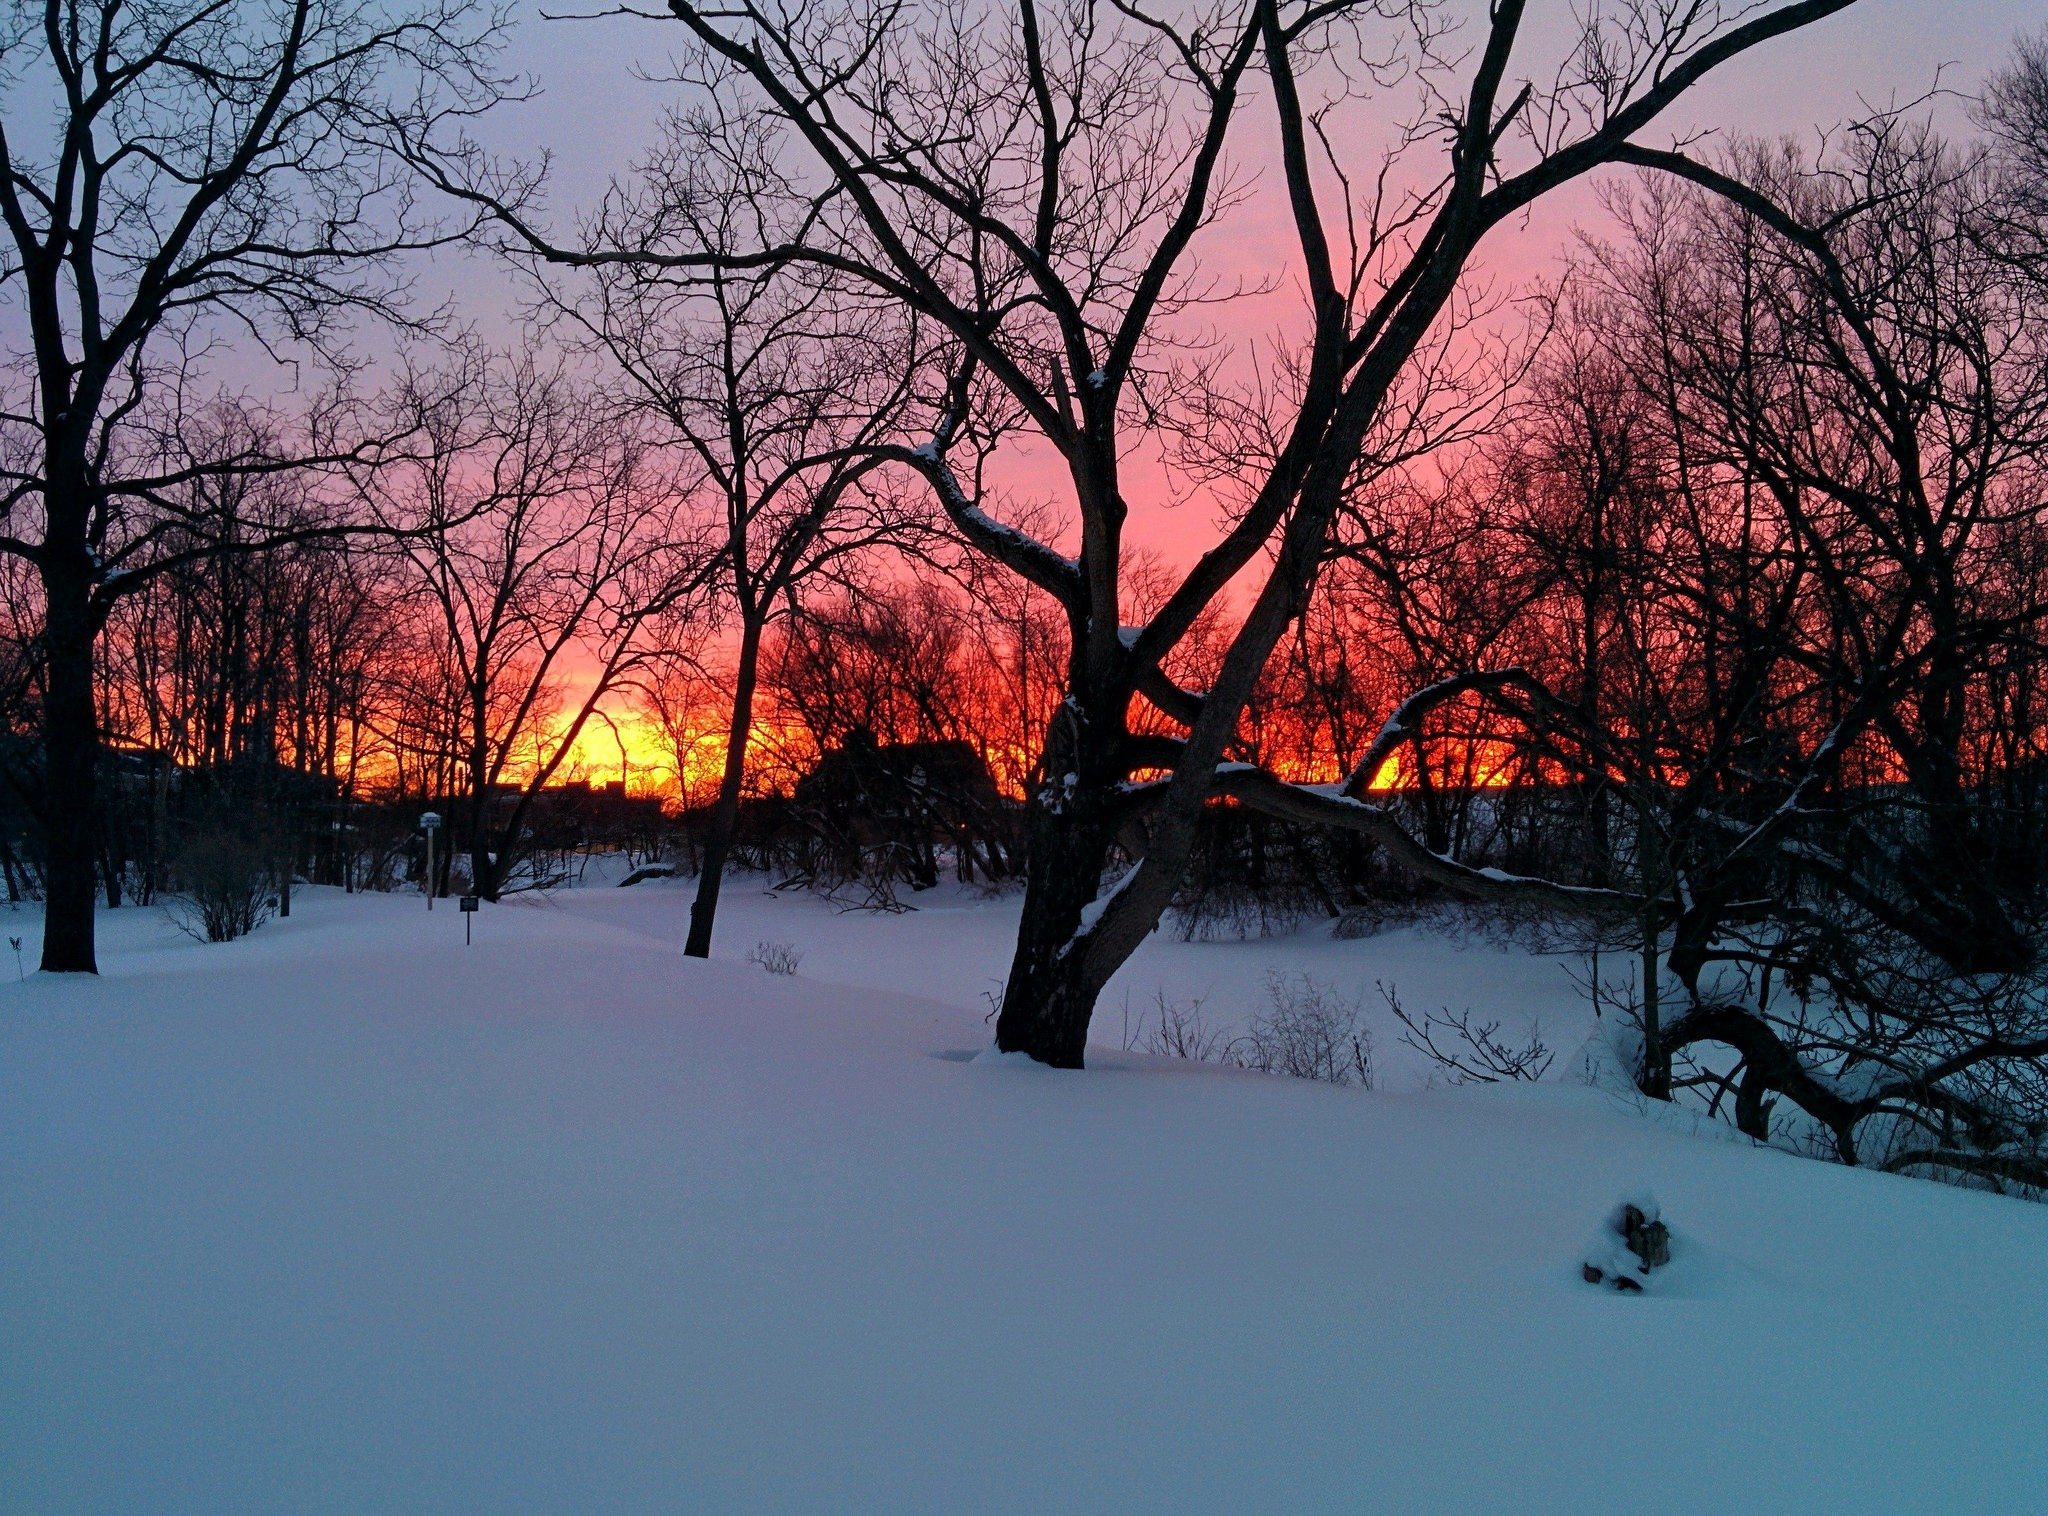 General 2048x1516 snow red sunset winter outdoors